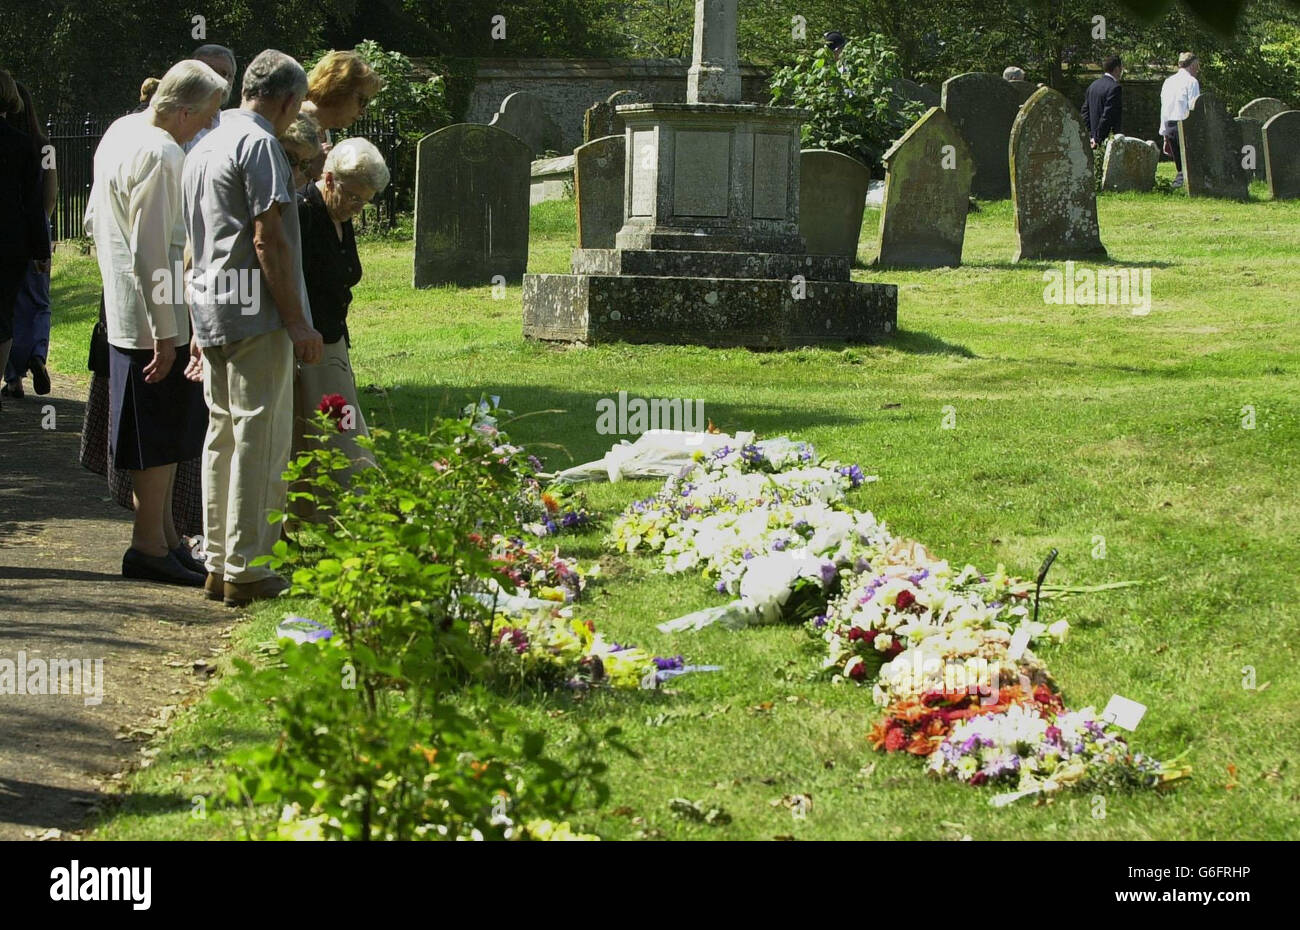 Mourners look at the floral tributes left for Dr David Kelly at St Mary's Church in Longworth, Oxfordshire. Around 160 mourners including Deputy Prime Minister John Prescott and Lord Hutton, who is leading the inquiry into Dr Kelly's apparent suicide, had arrived earlier. Stock Photo